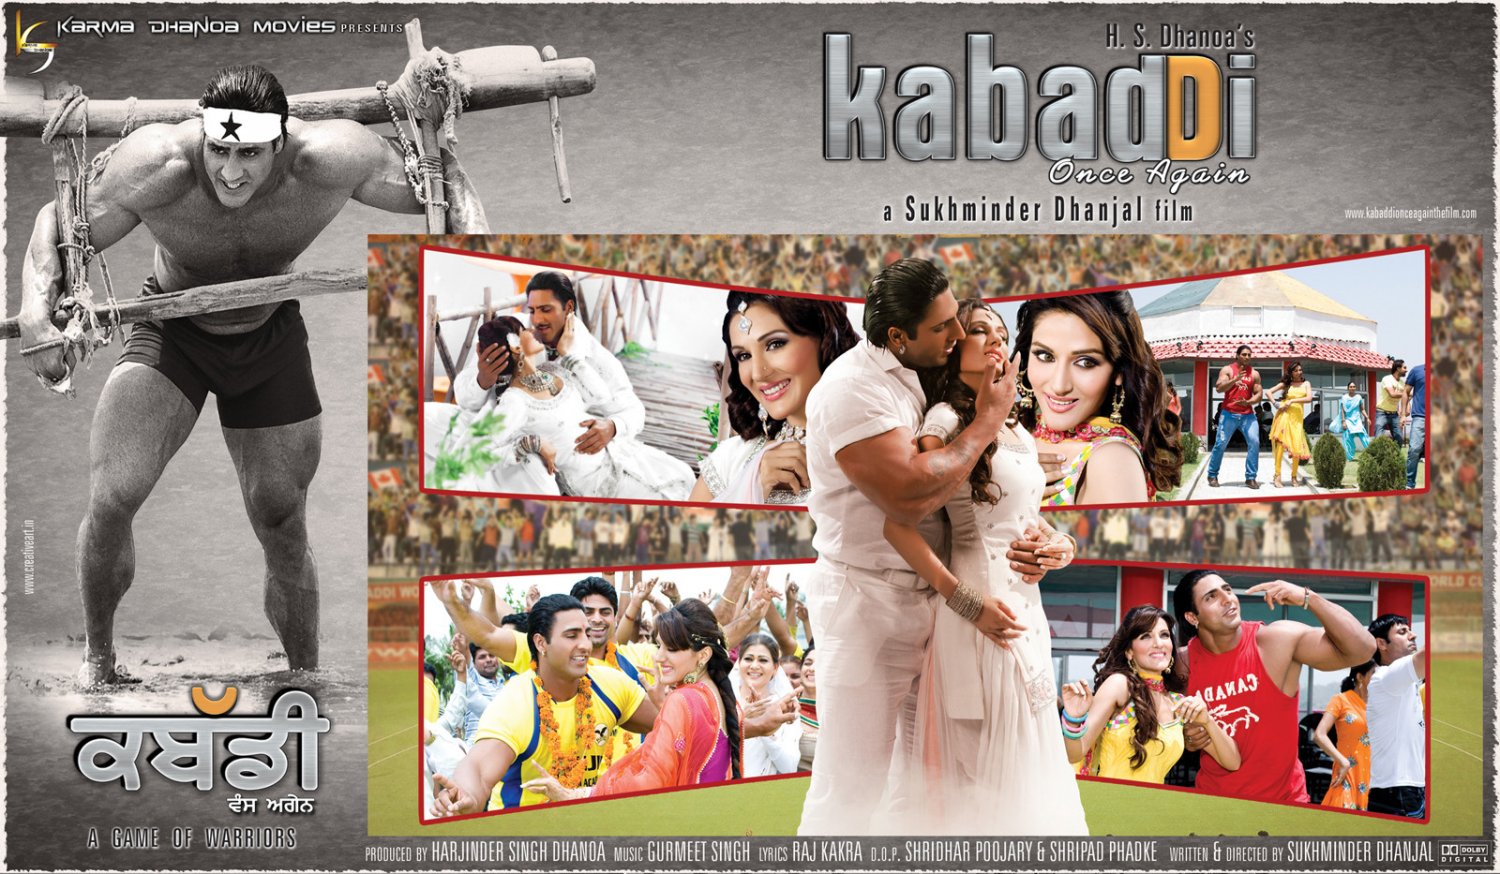 Extra Large Movie Poster Image for Kabaddi Once Again (#5 of 10)